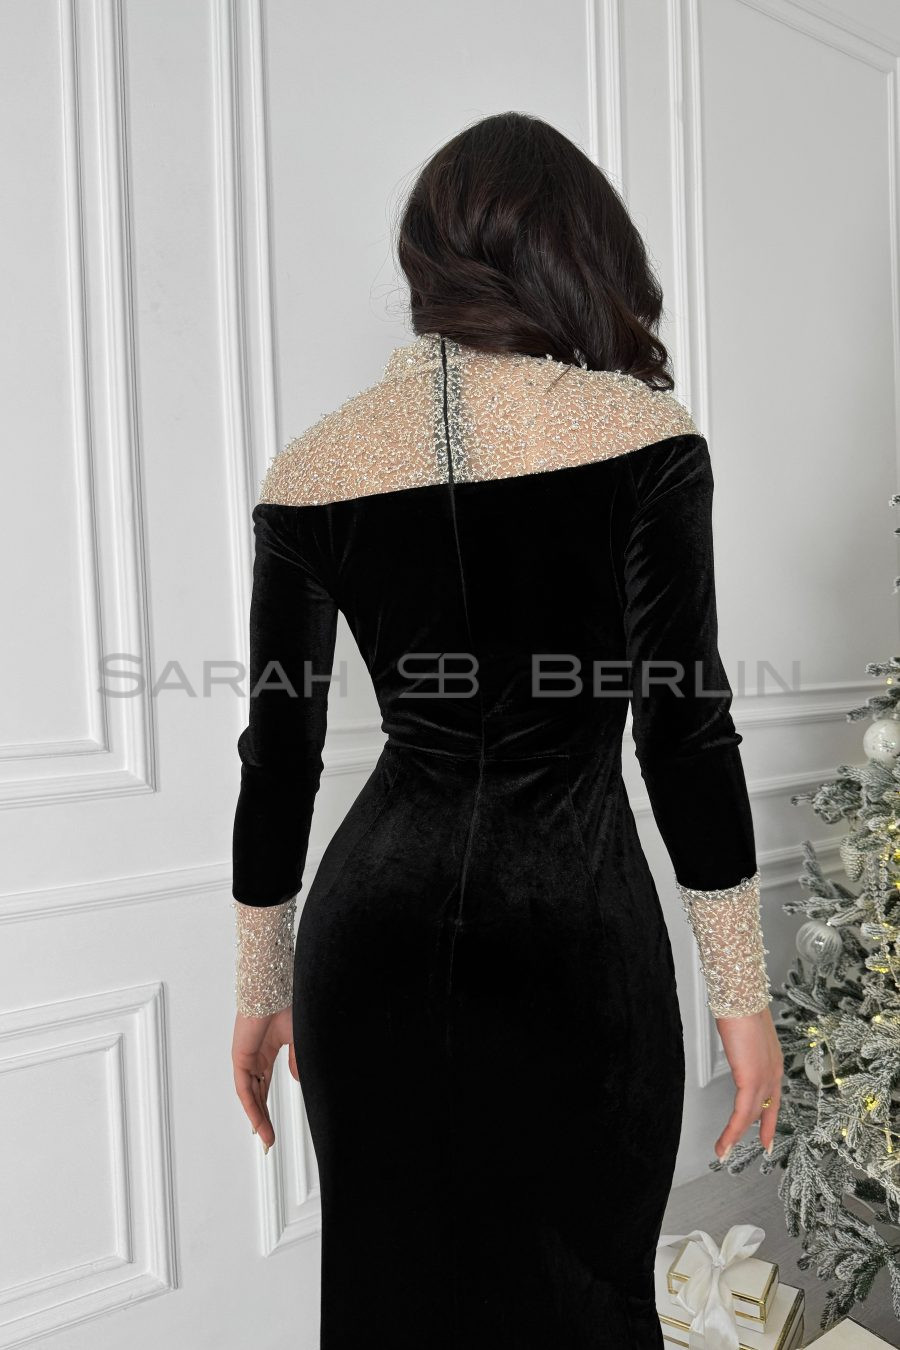 Floor-length velvet dress with yoke and cuffs embroidered with pearls